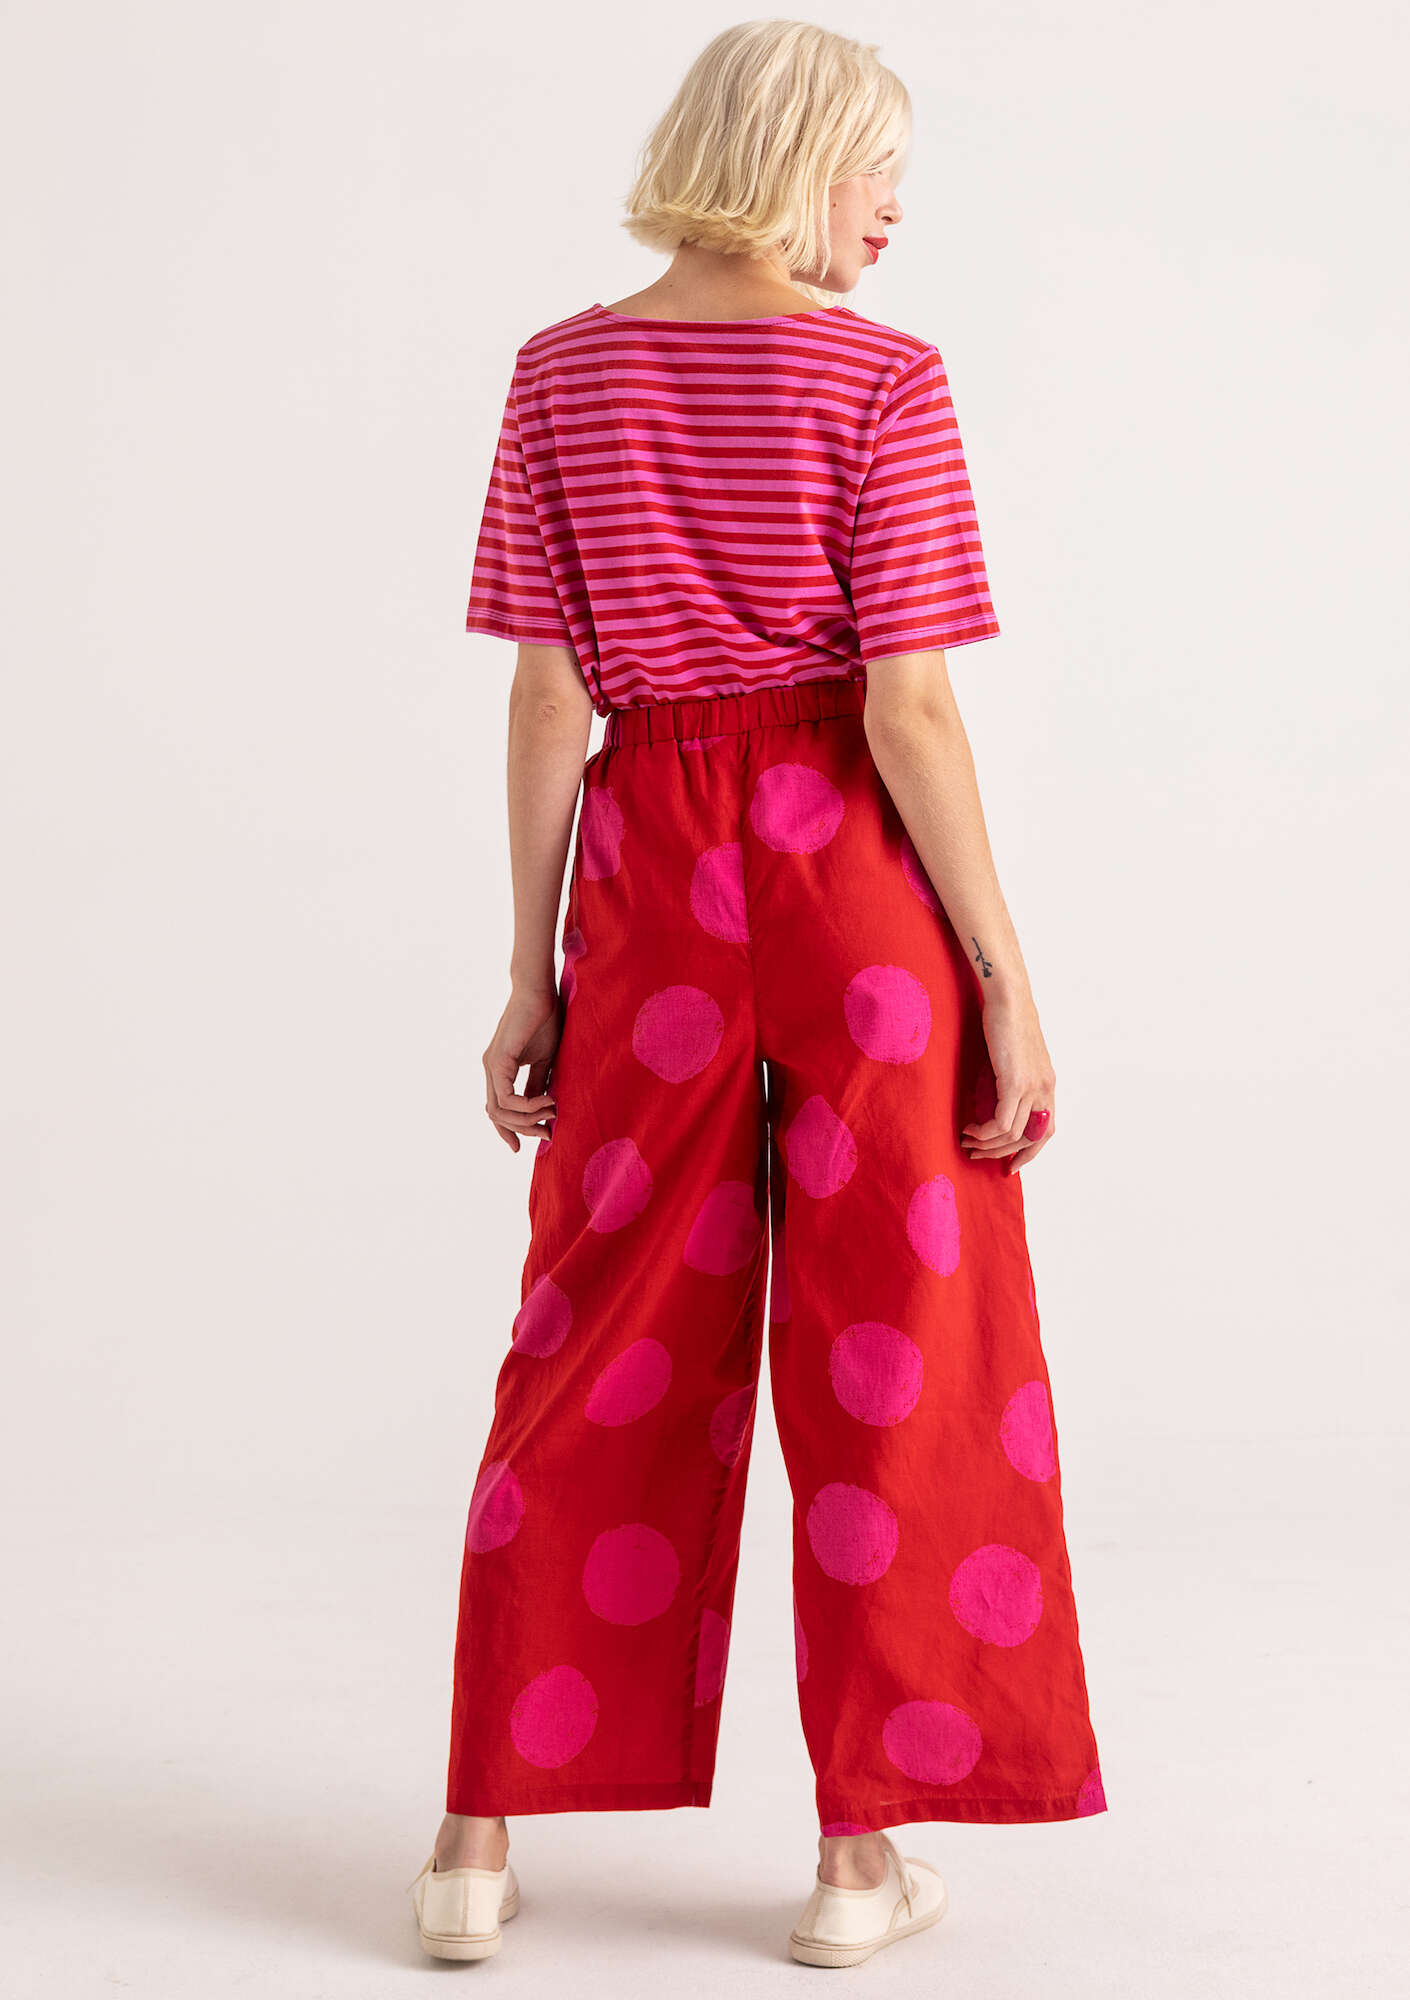  Woven “Palette” pants in organic cotton parrot red/patterned